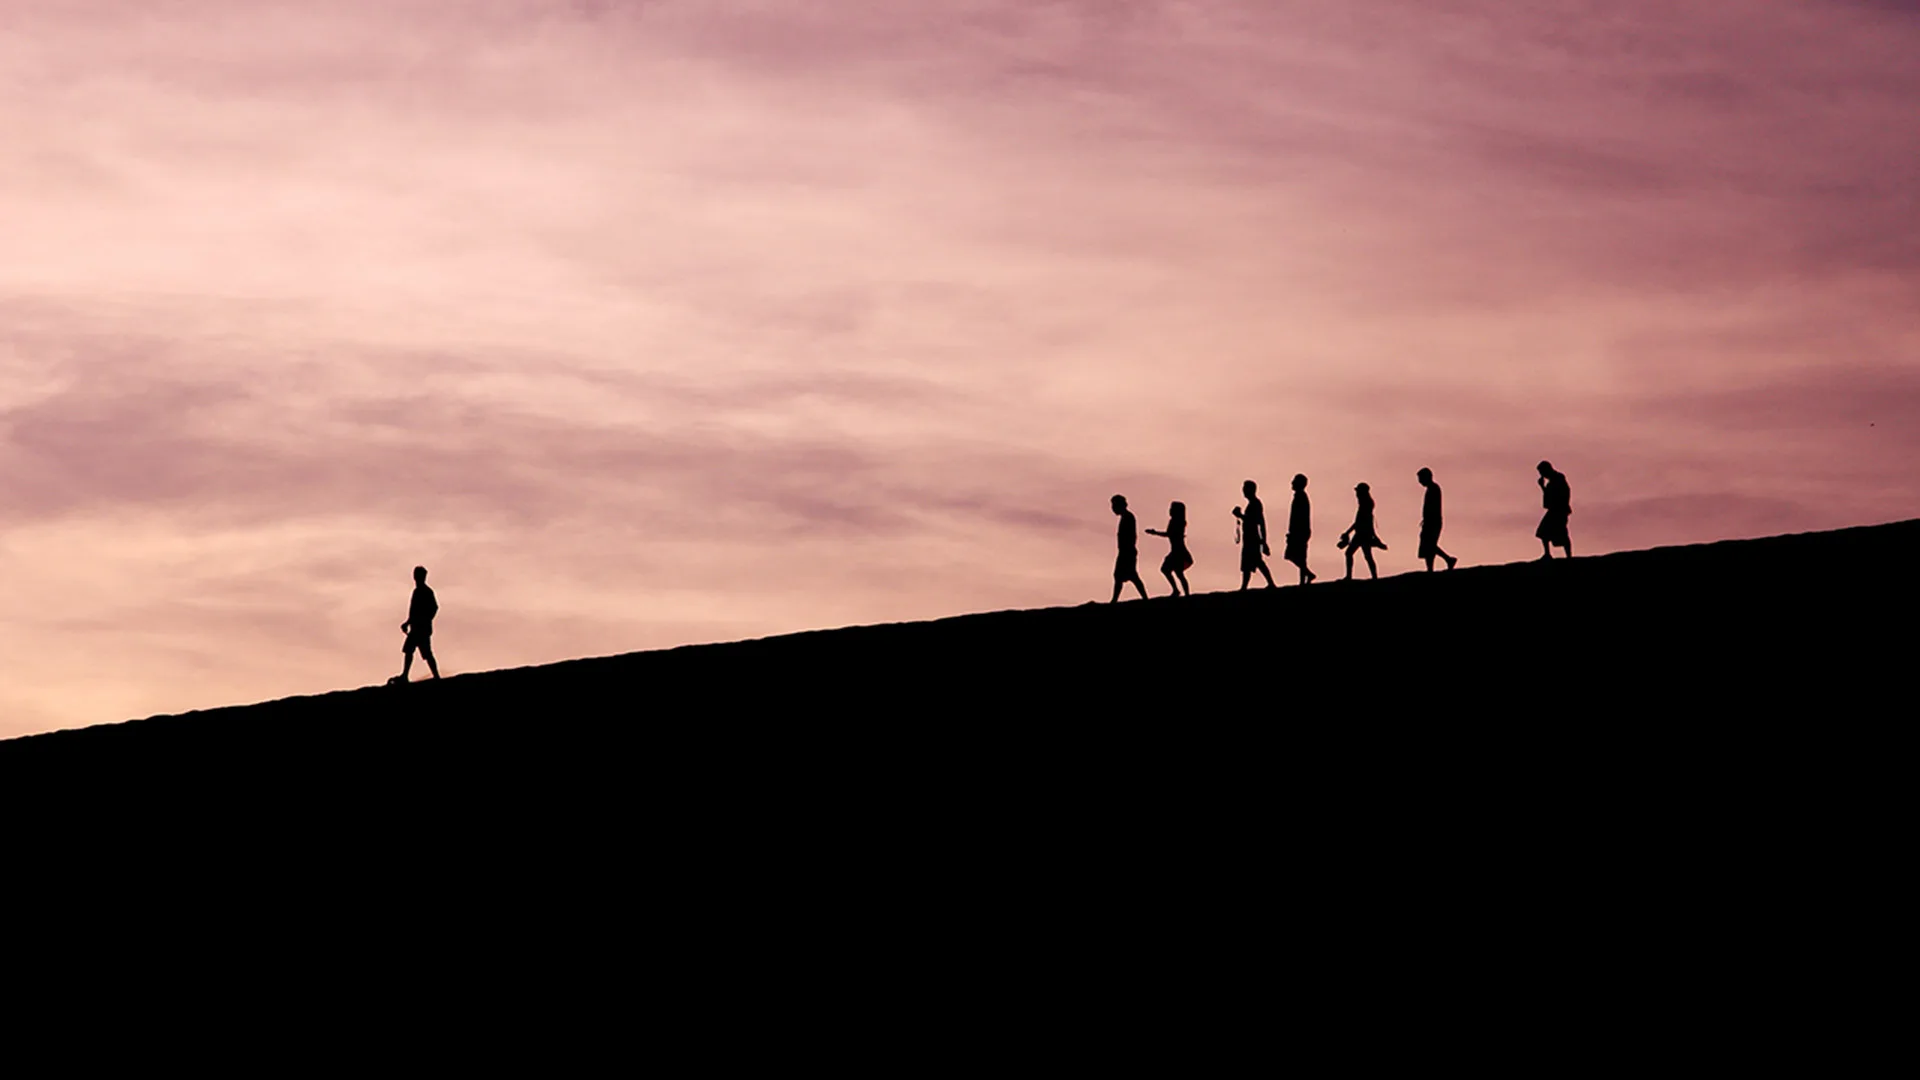 A silhouette of people walking down a hill